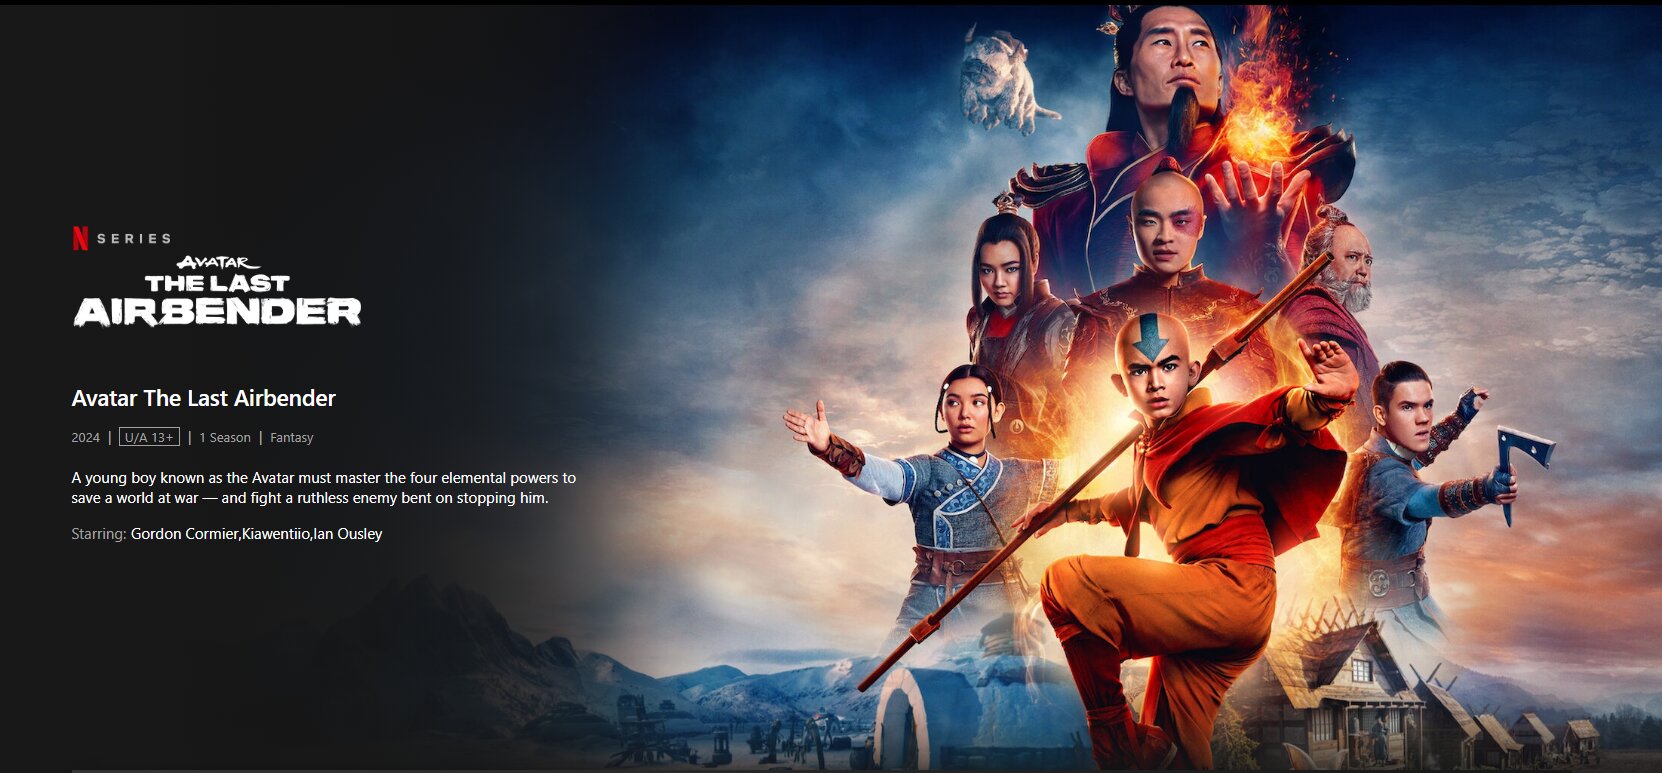 Avatar The Last Airbender review netflix today